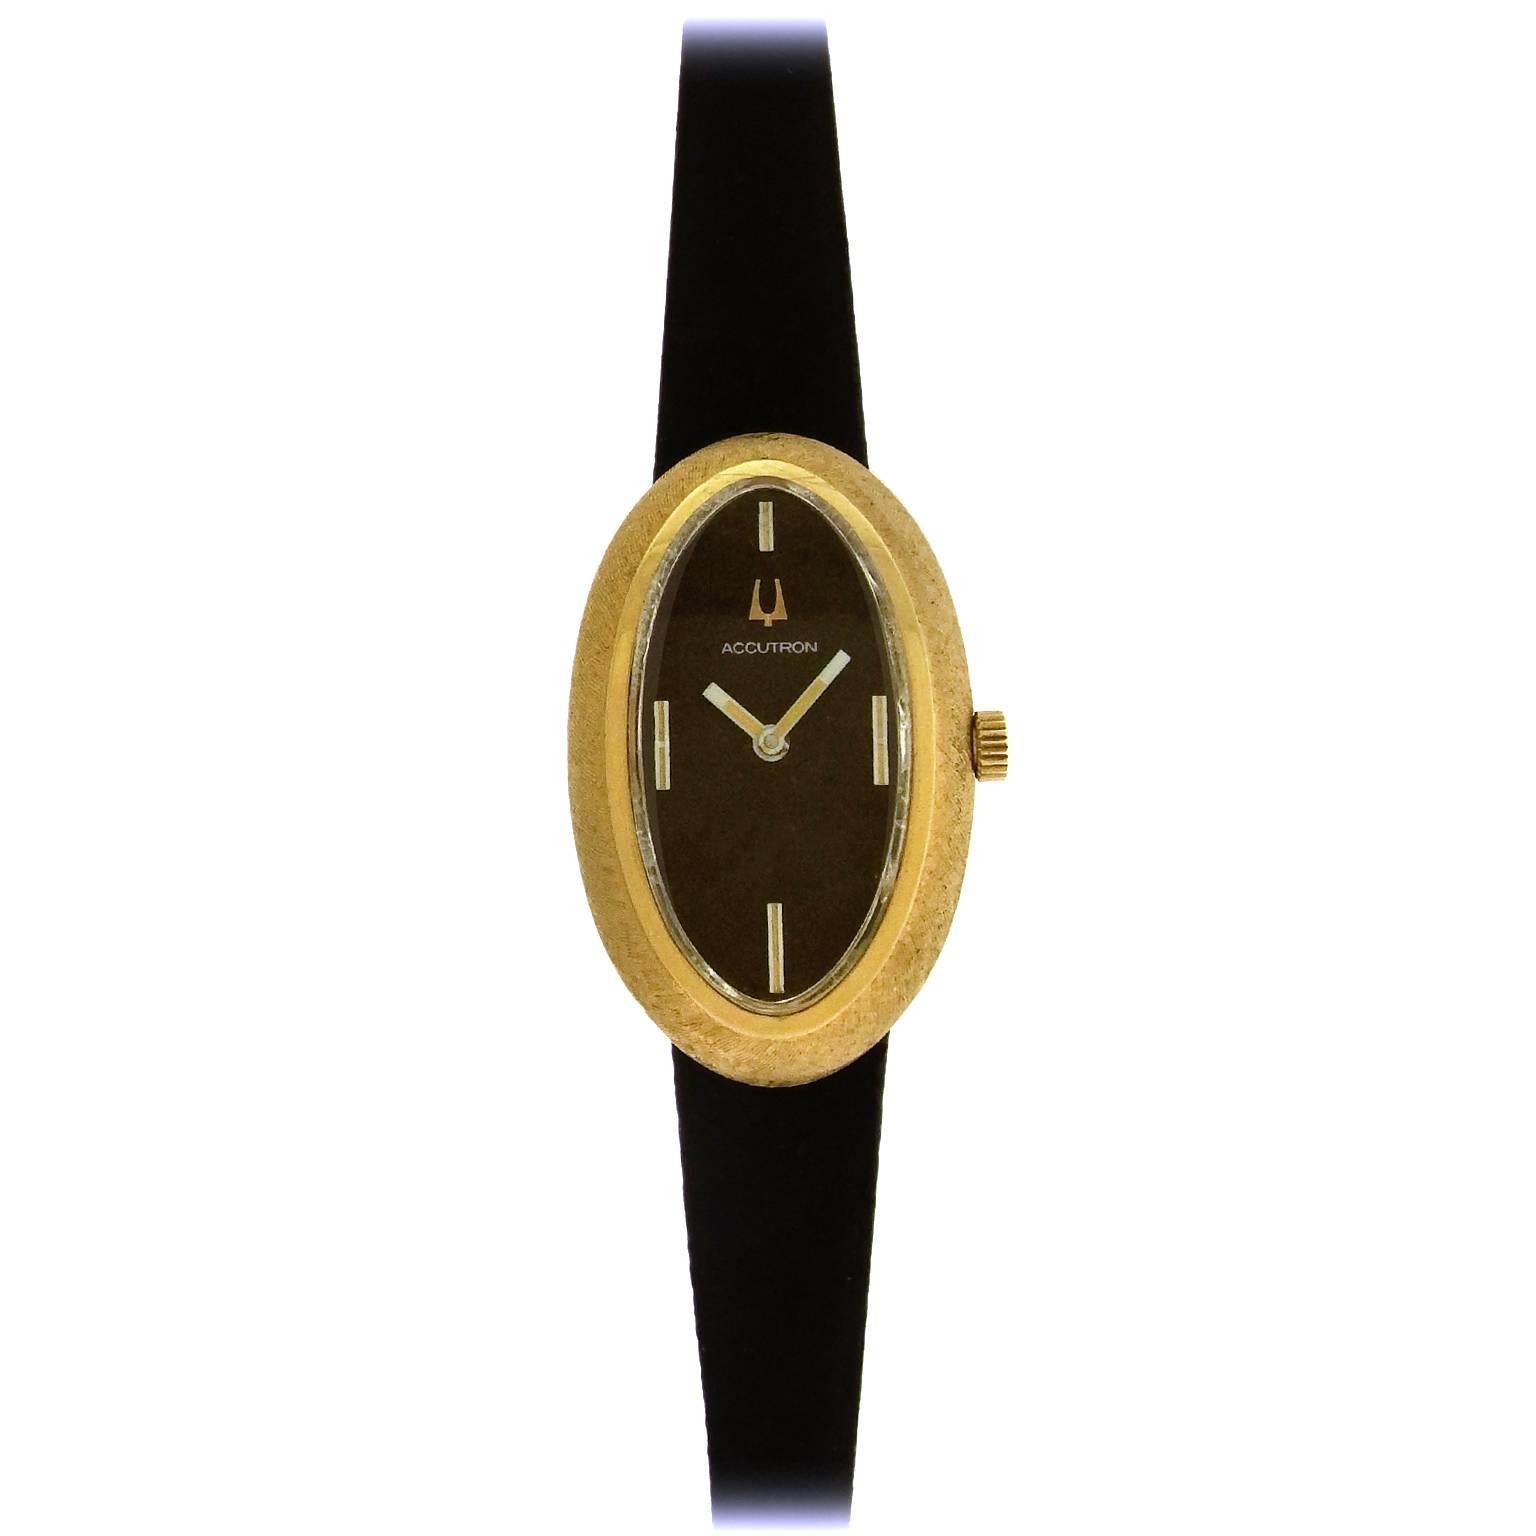 Rare 14K yellow gold women's Bulova Accutron oval wristwatch, made in 1973, features an original Florentine finish oval 23mm x 37mm case with hooded lugs, black dial with white luminous exaggerated hour indexes and white luminous hands,  the